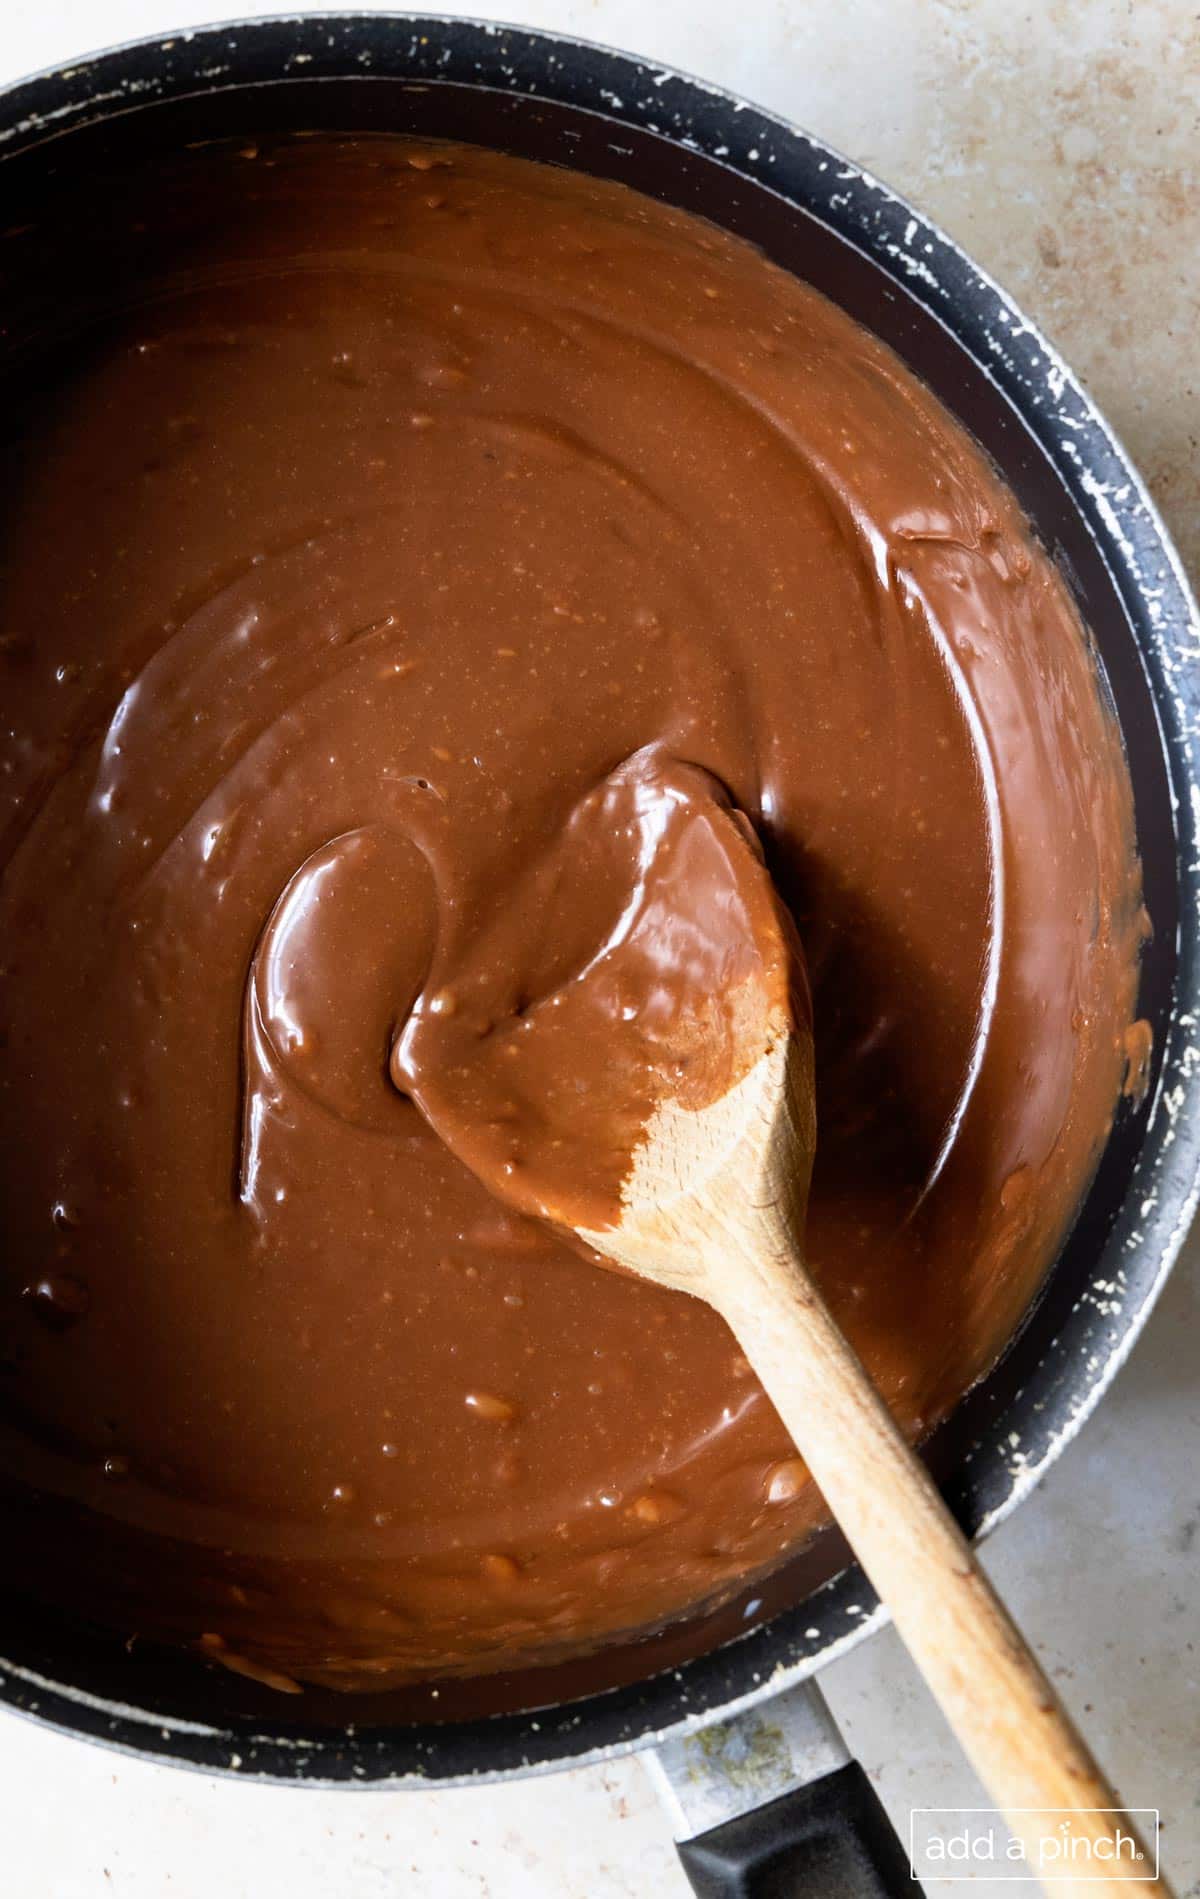 Photo of melted chocolate in a saucepan  with a wooden spoon ready to be poured into a prepared pan.